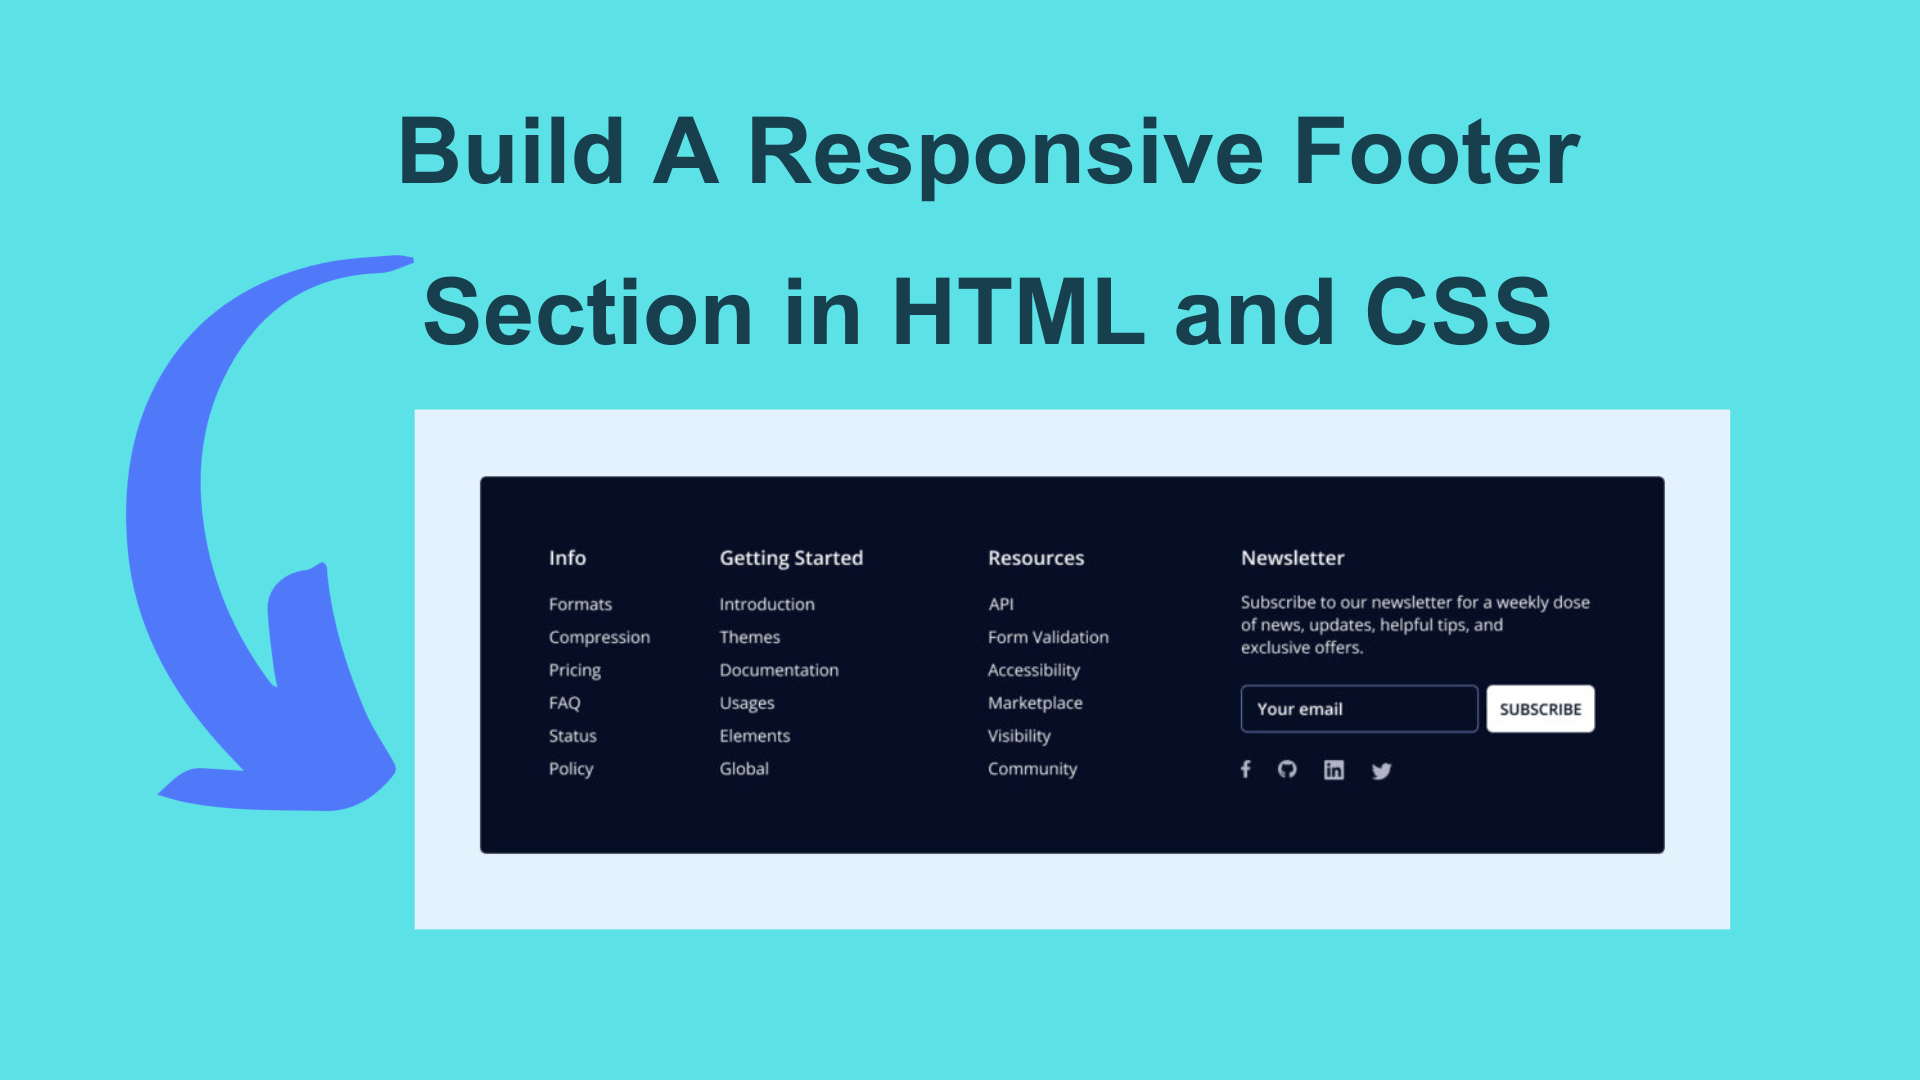 Build A Responsive Footer Section in HTML and CSS